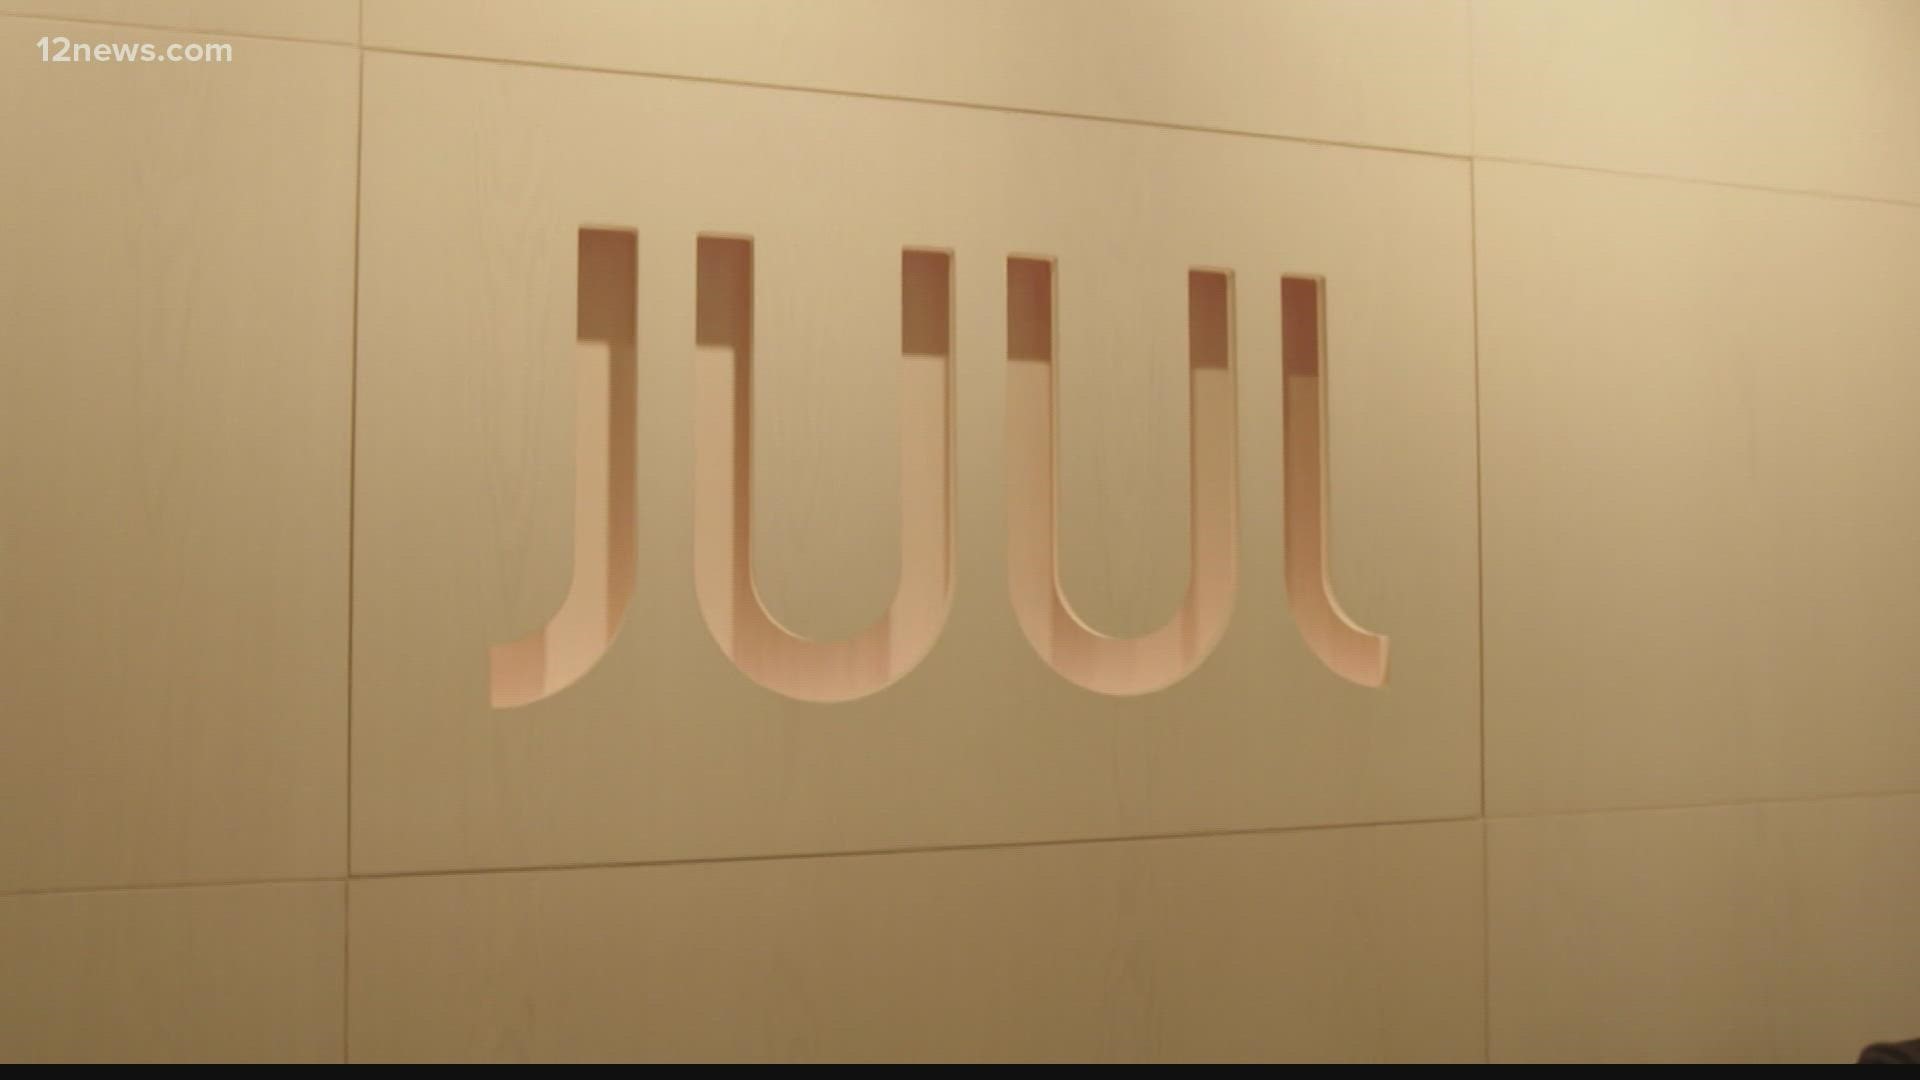 The e-cigarette maker JUUL Labs will pay Arizona $14.5 million after the state brought a lawsuit against the company accusing it of targeting young people.